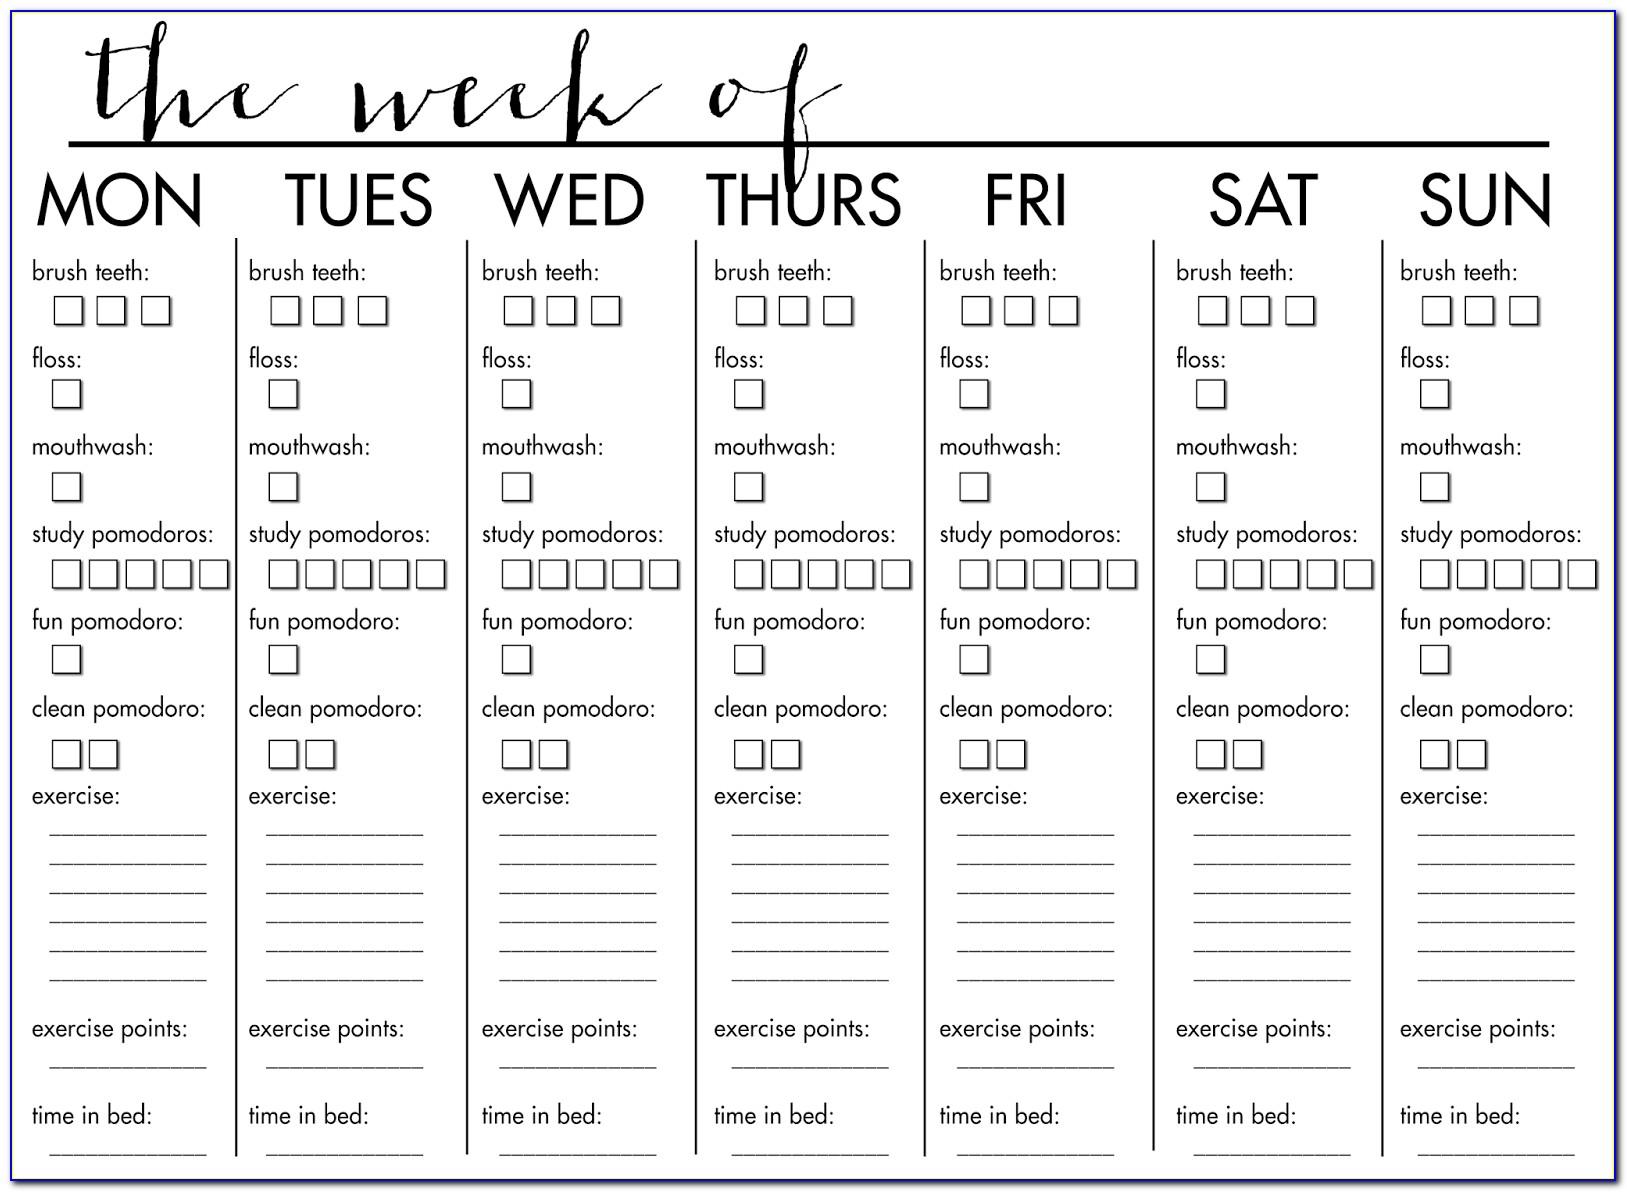 Weekly Workout Template Excel